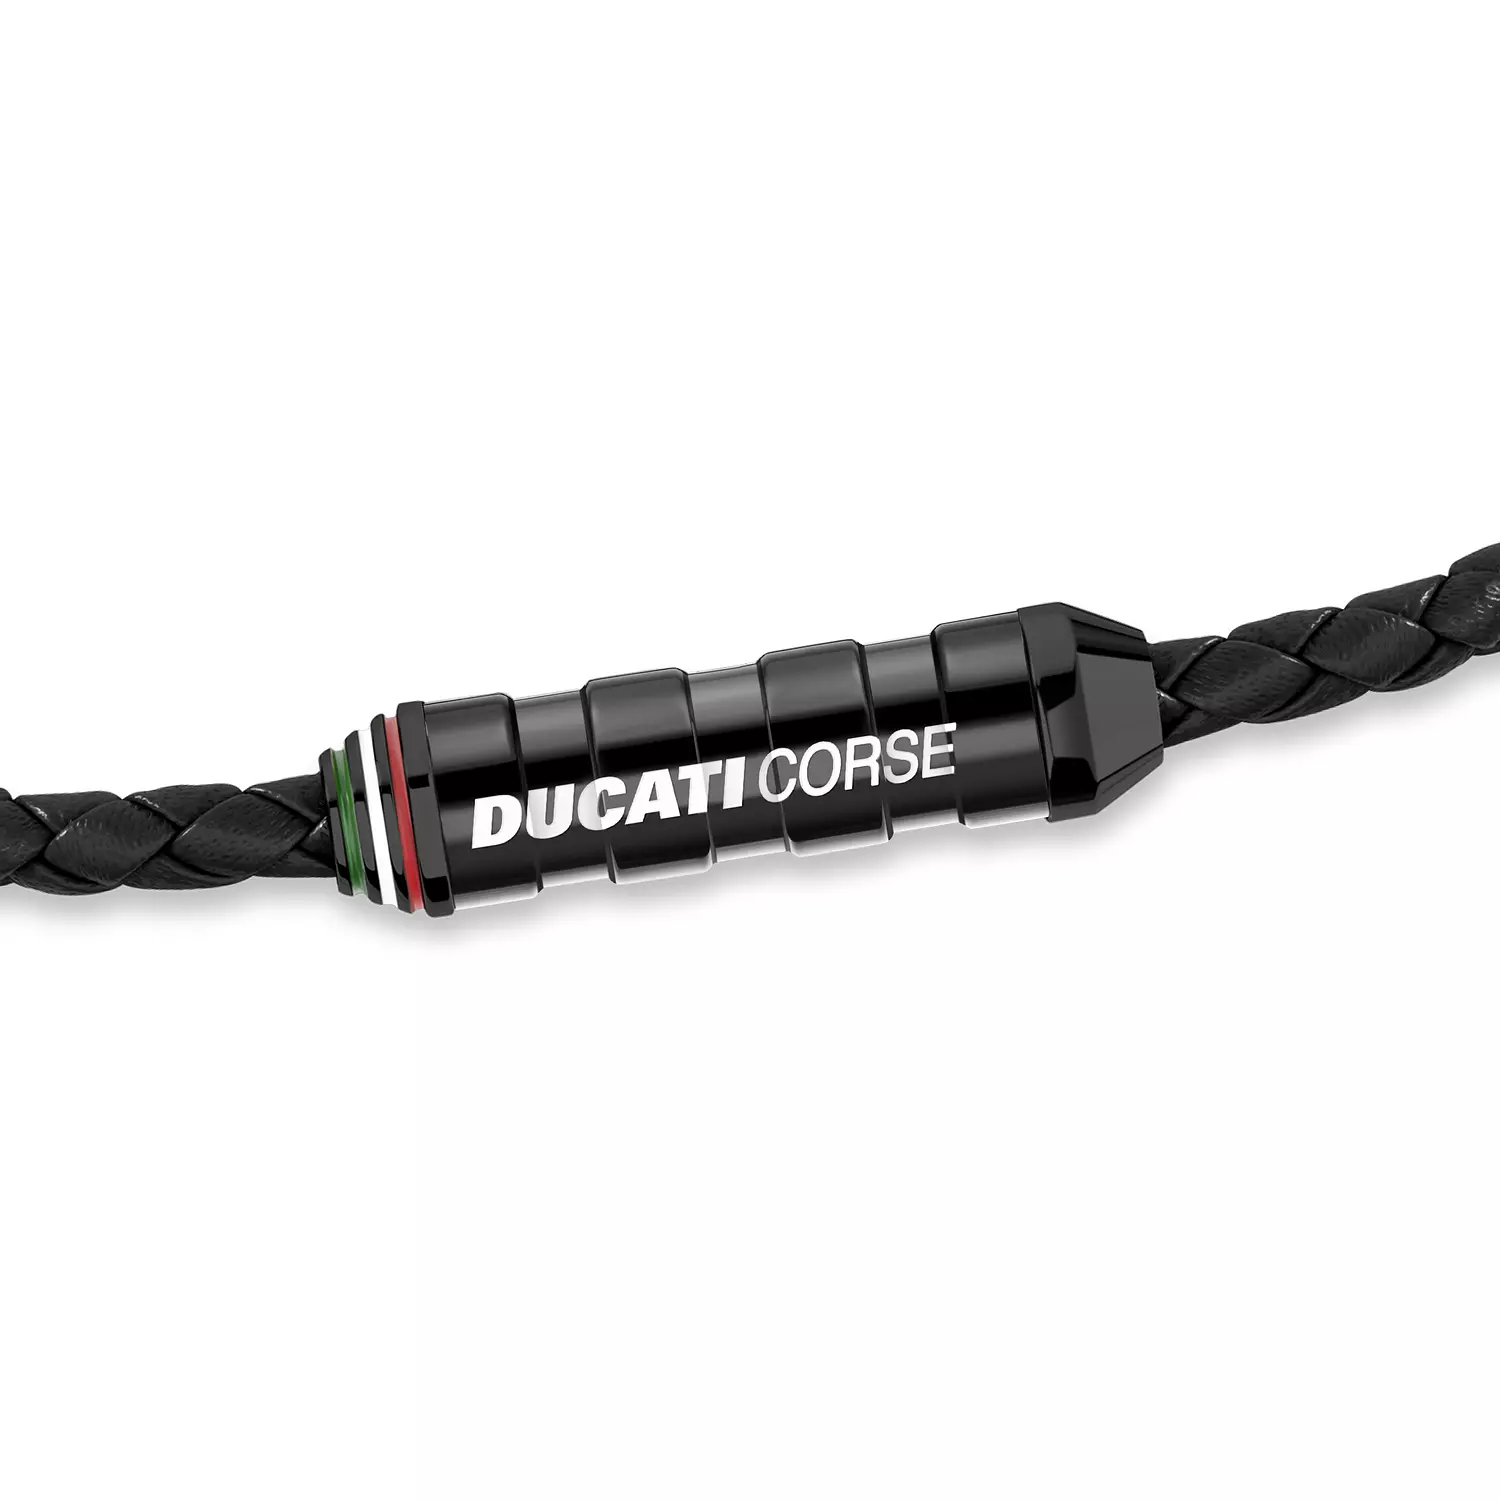 Ducati - DTAGB2137212 - MAGNETE PELLE LEATHER WITH IP GUN BR SMALL 1